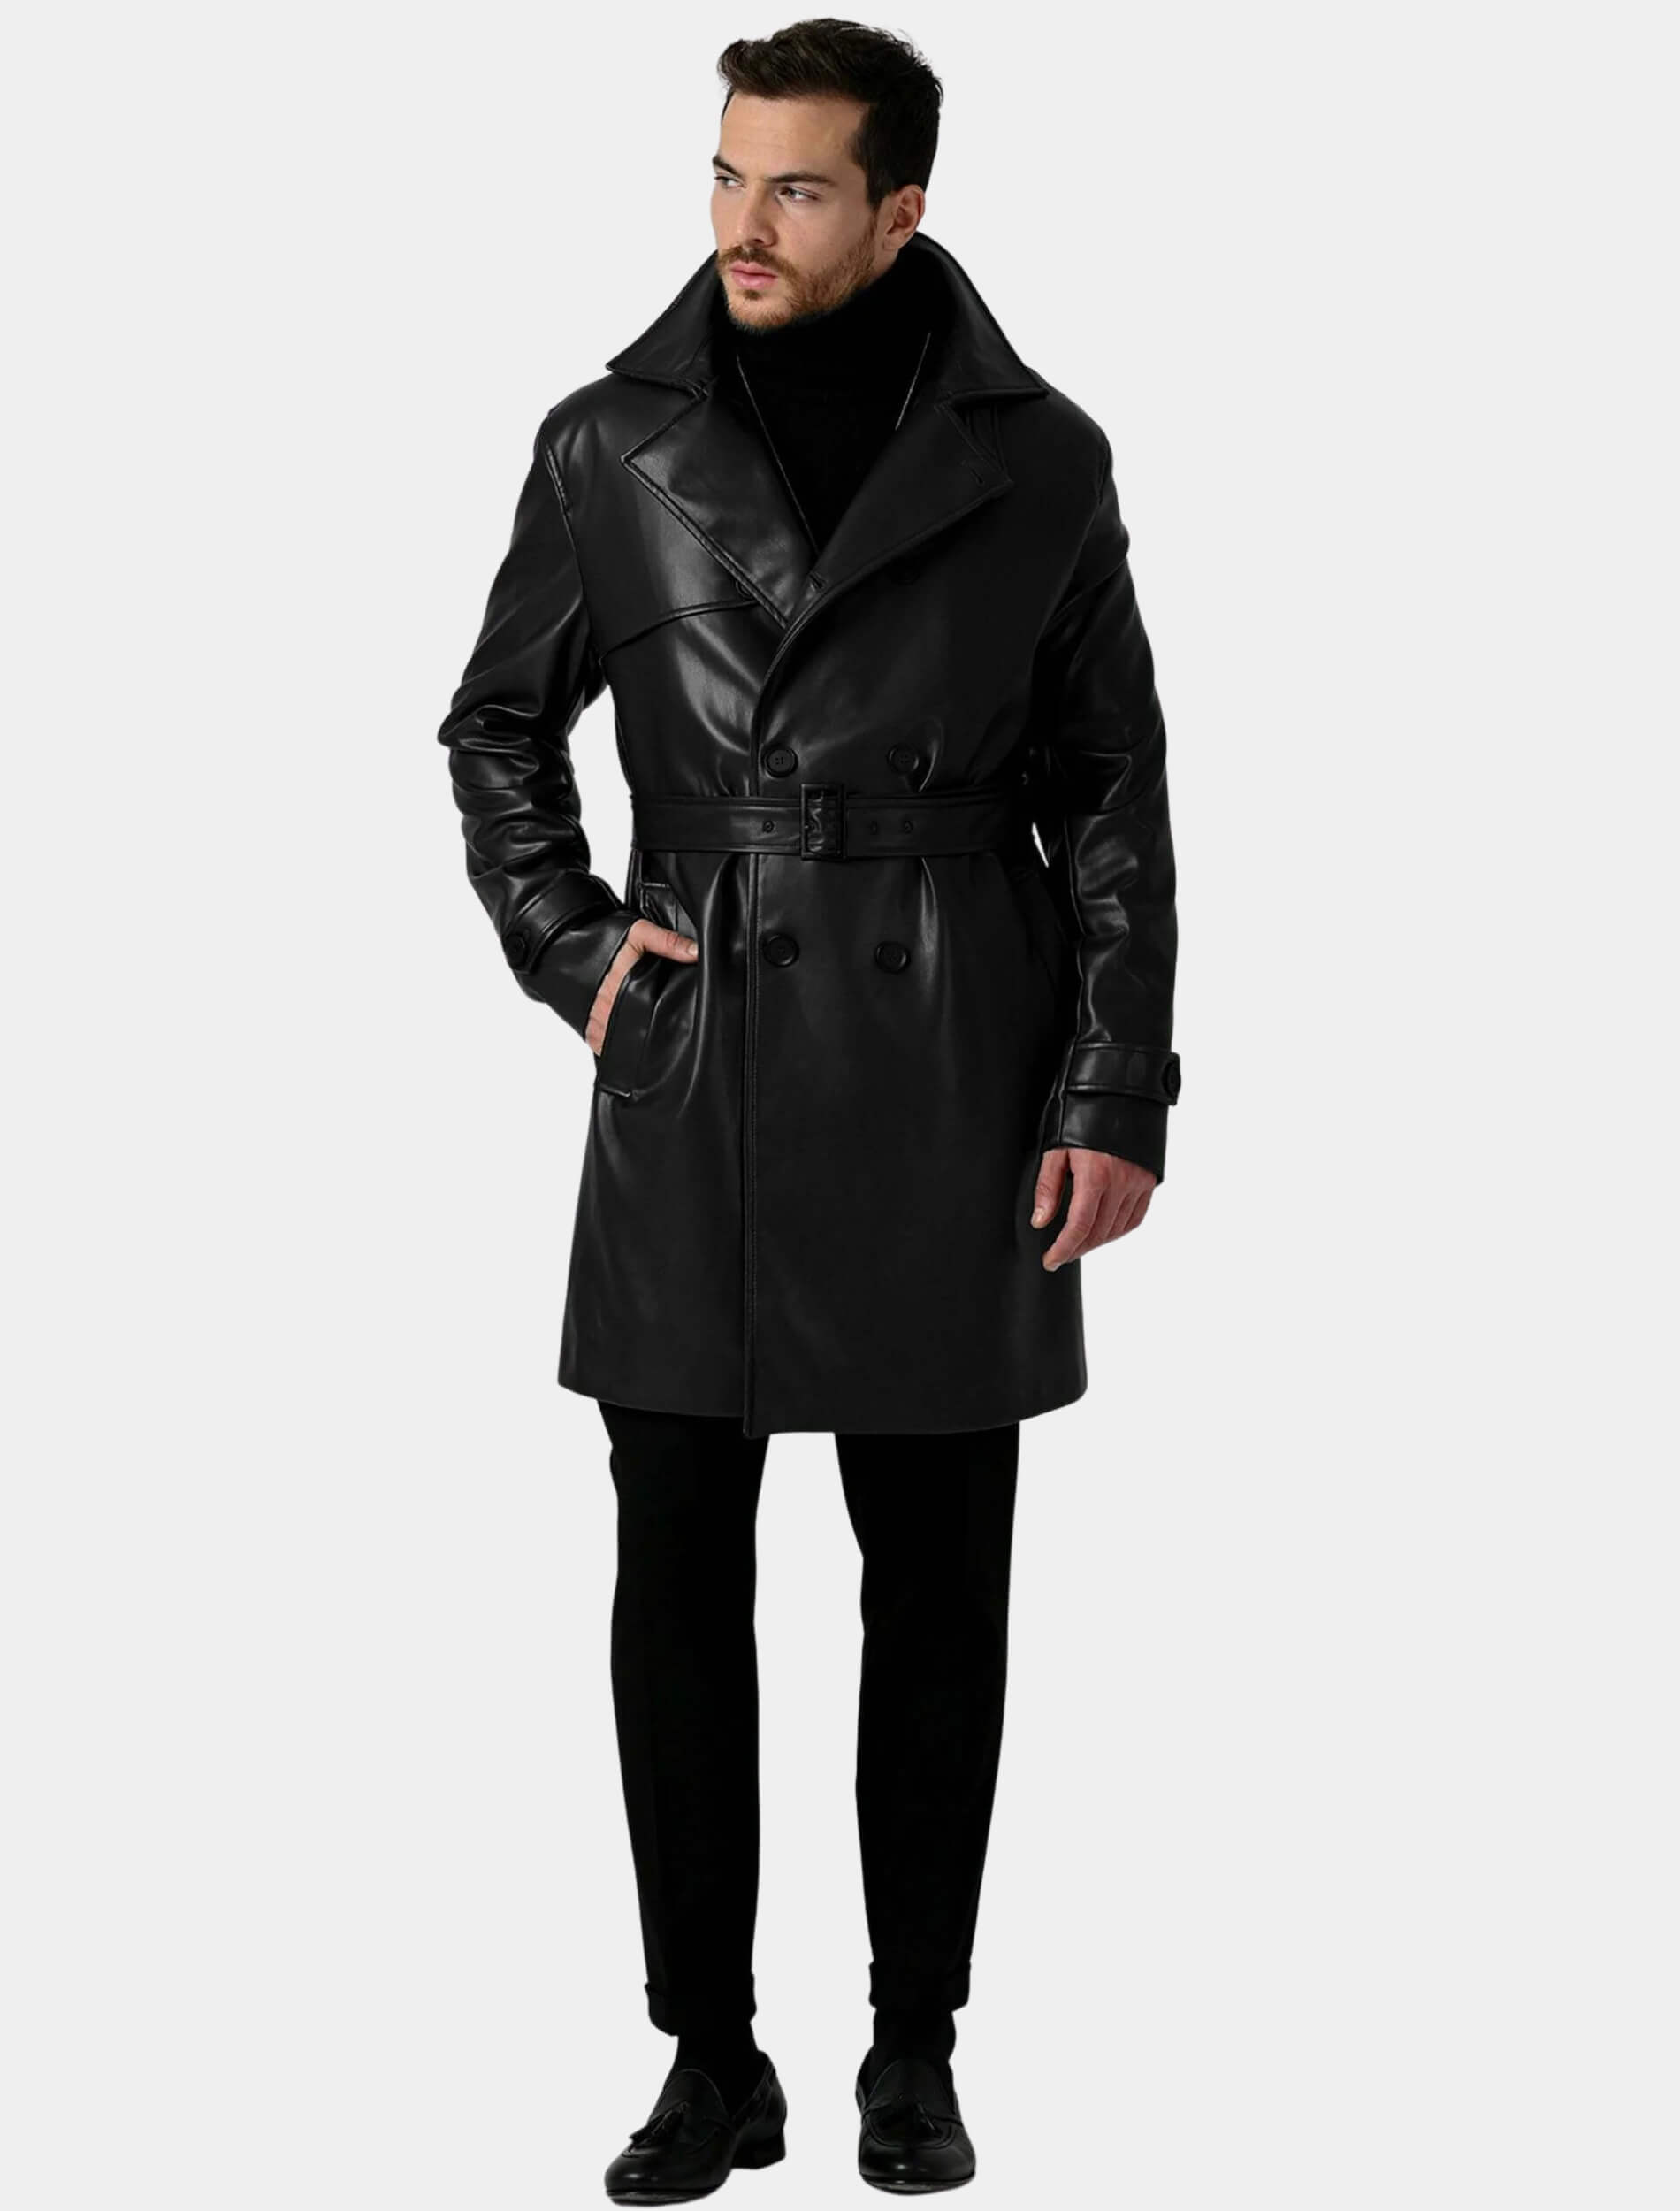 Men's Classic Black Leather Trench Coat - Mens Leather Wear